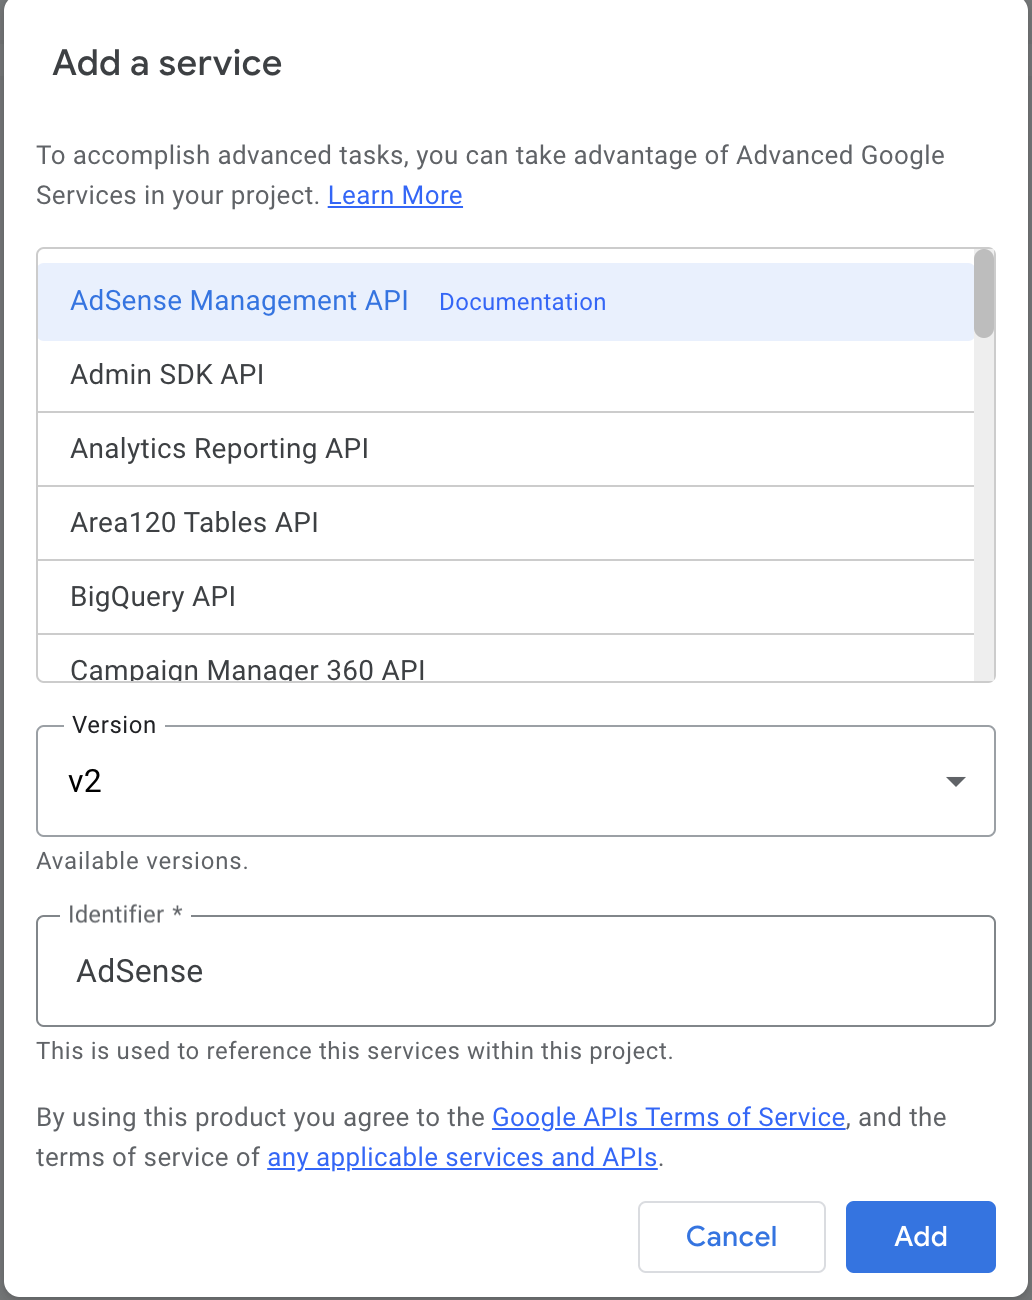 Add a service dialog box, which includes options such as AdSense Management API and Admin SDK API.